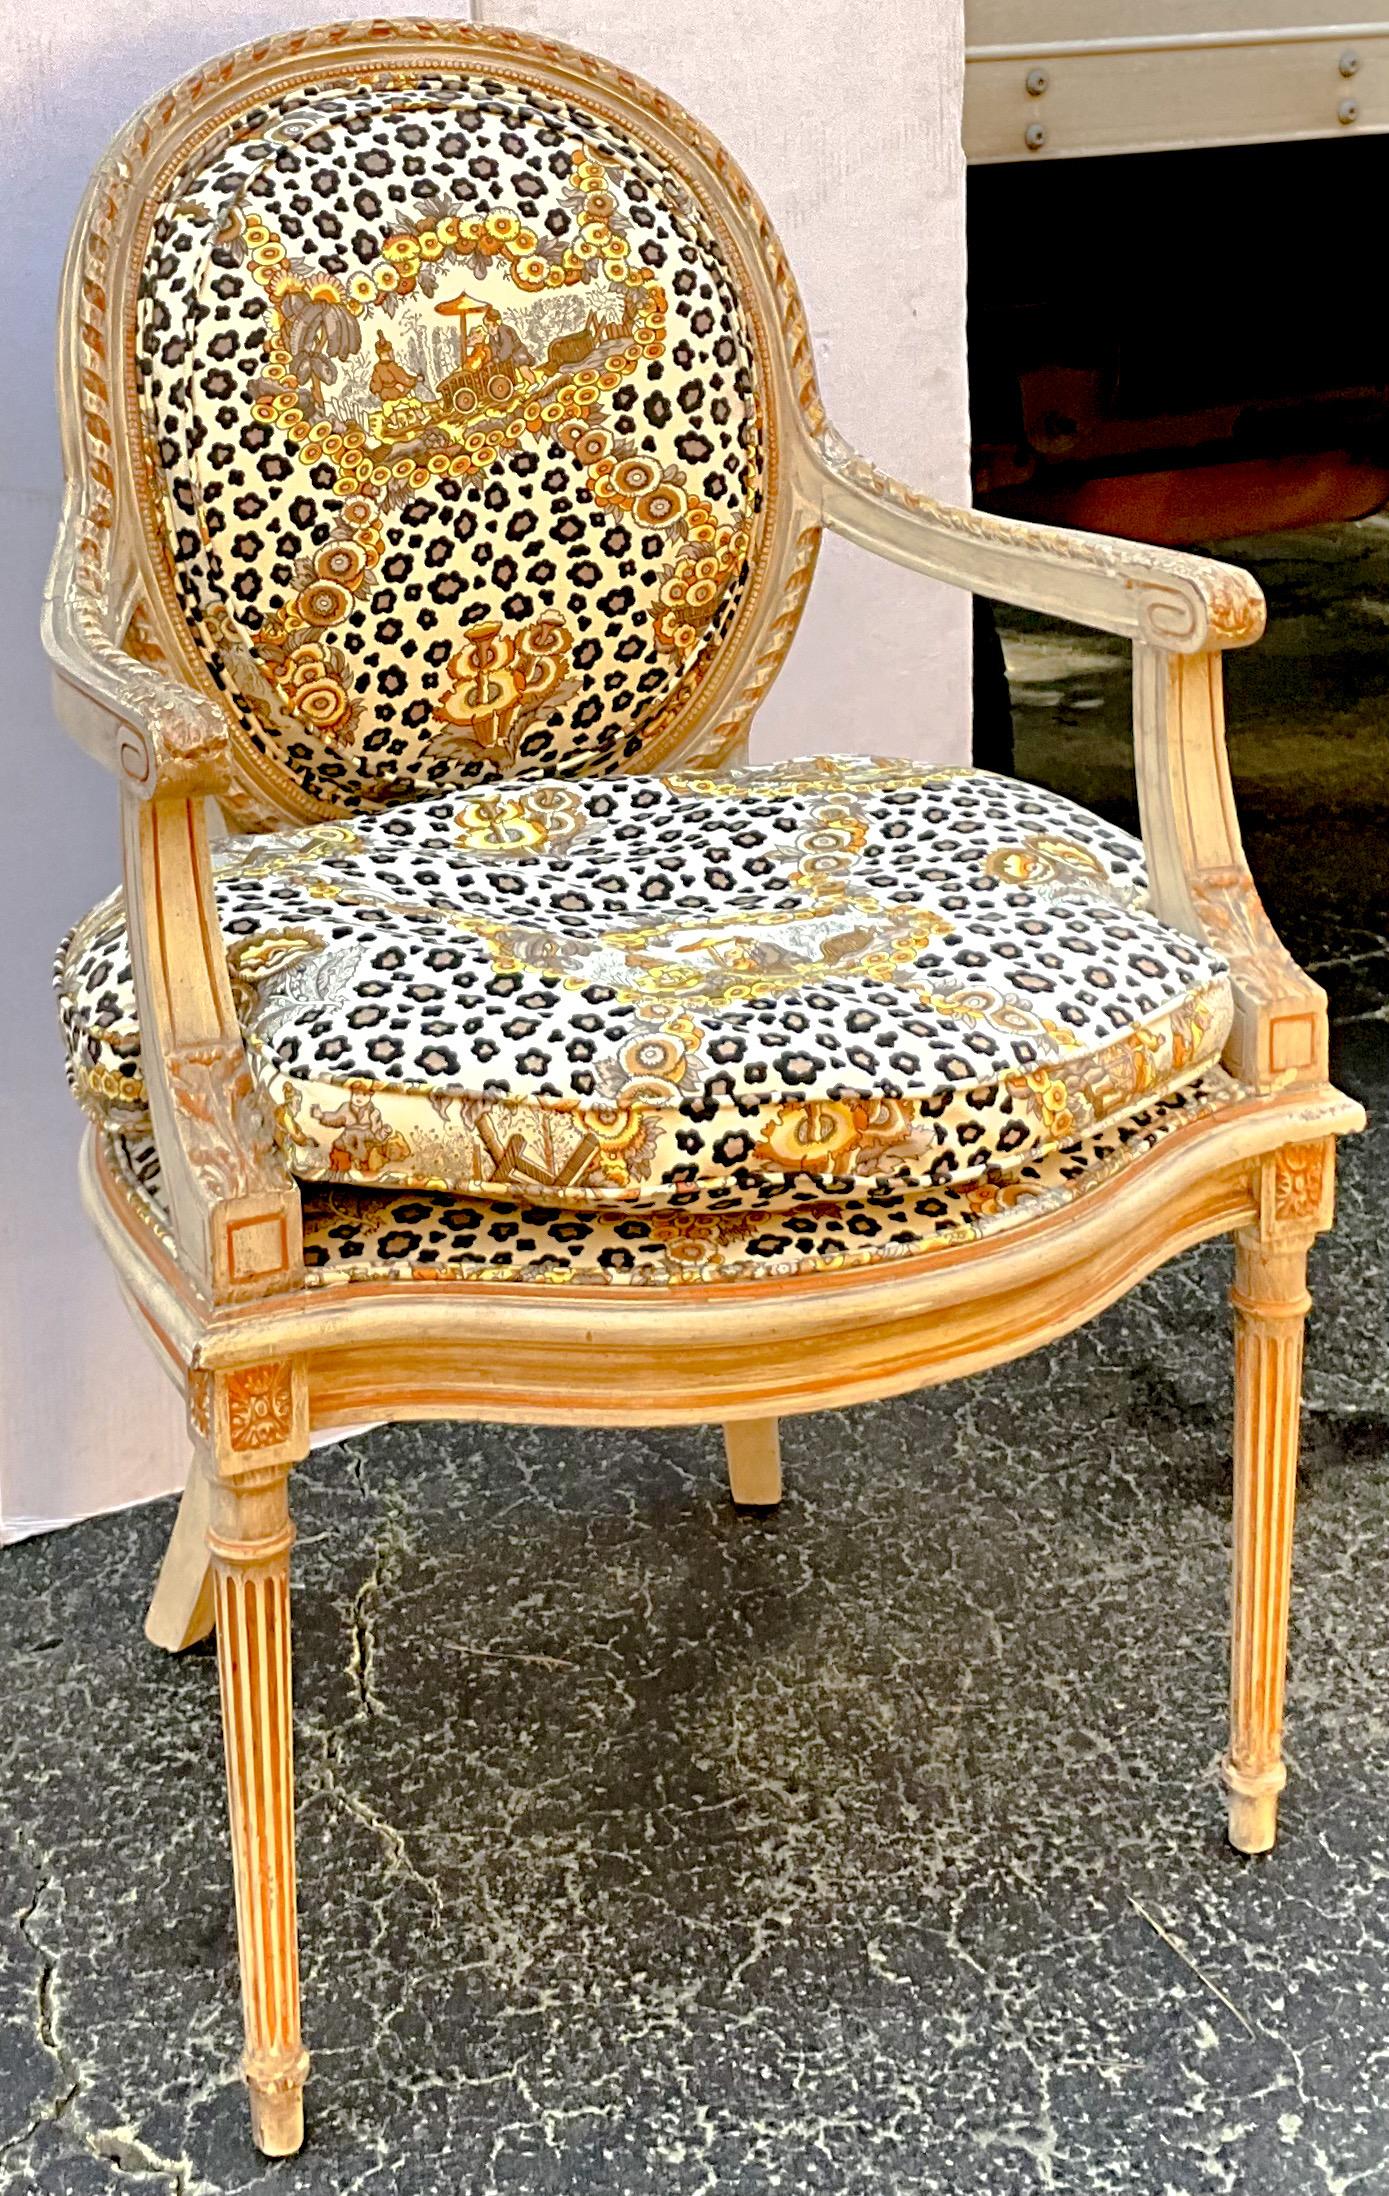 This is a 1950s French cerused pine Bergere chair upholstered in the highly sought after Brunschwig and Fils leopard chinoiserie. I always love this fabric…so charming. The cerused frame appears to be pine, and it also has some painted details. The